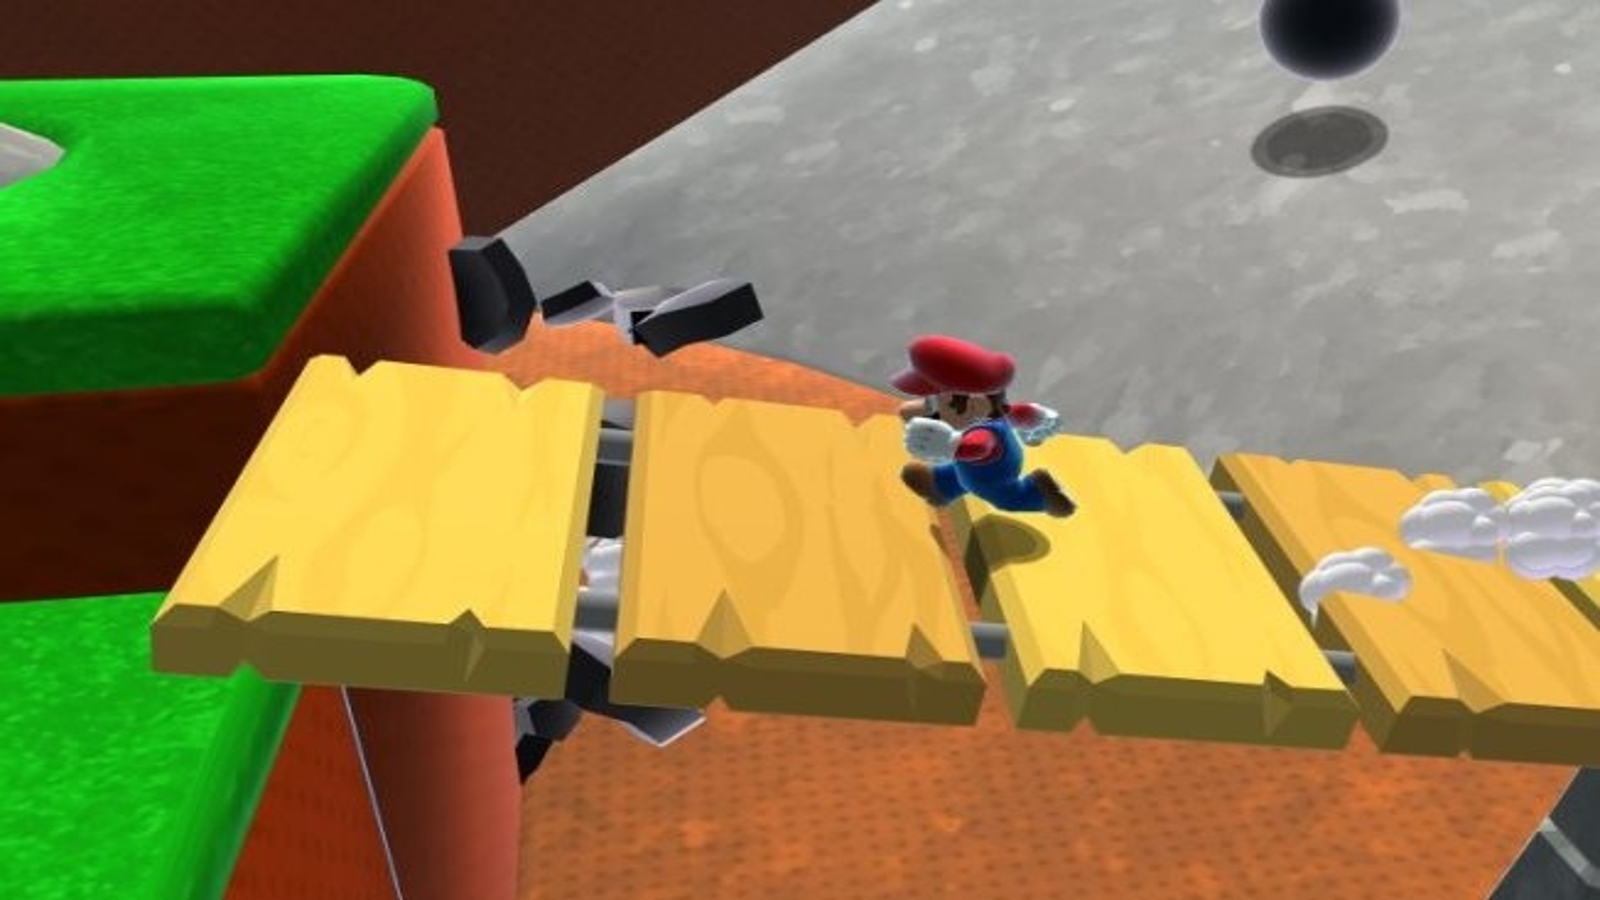 Working Super Mario 64 PC port hit by Nintendo copyright takedowns